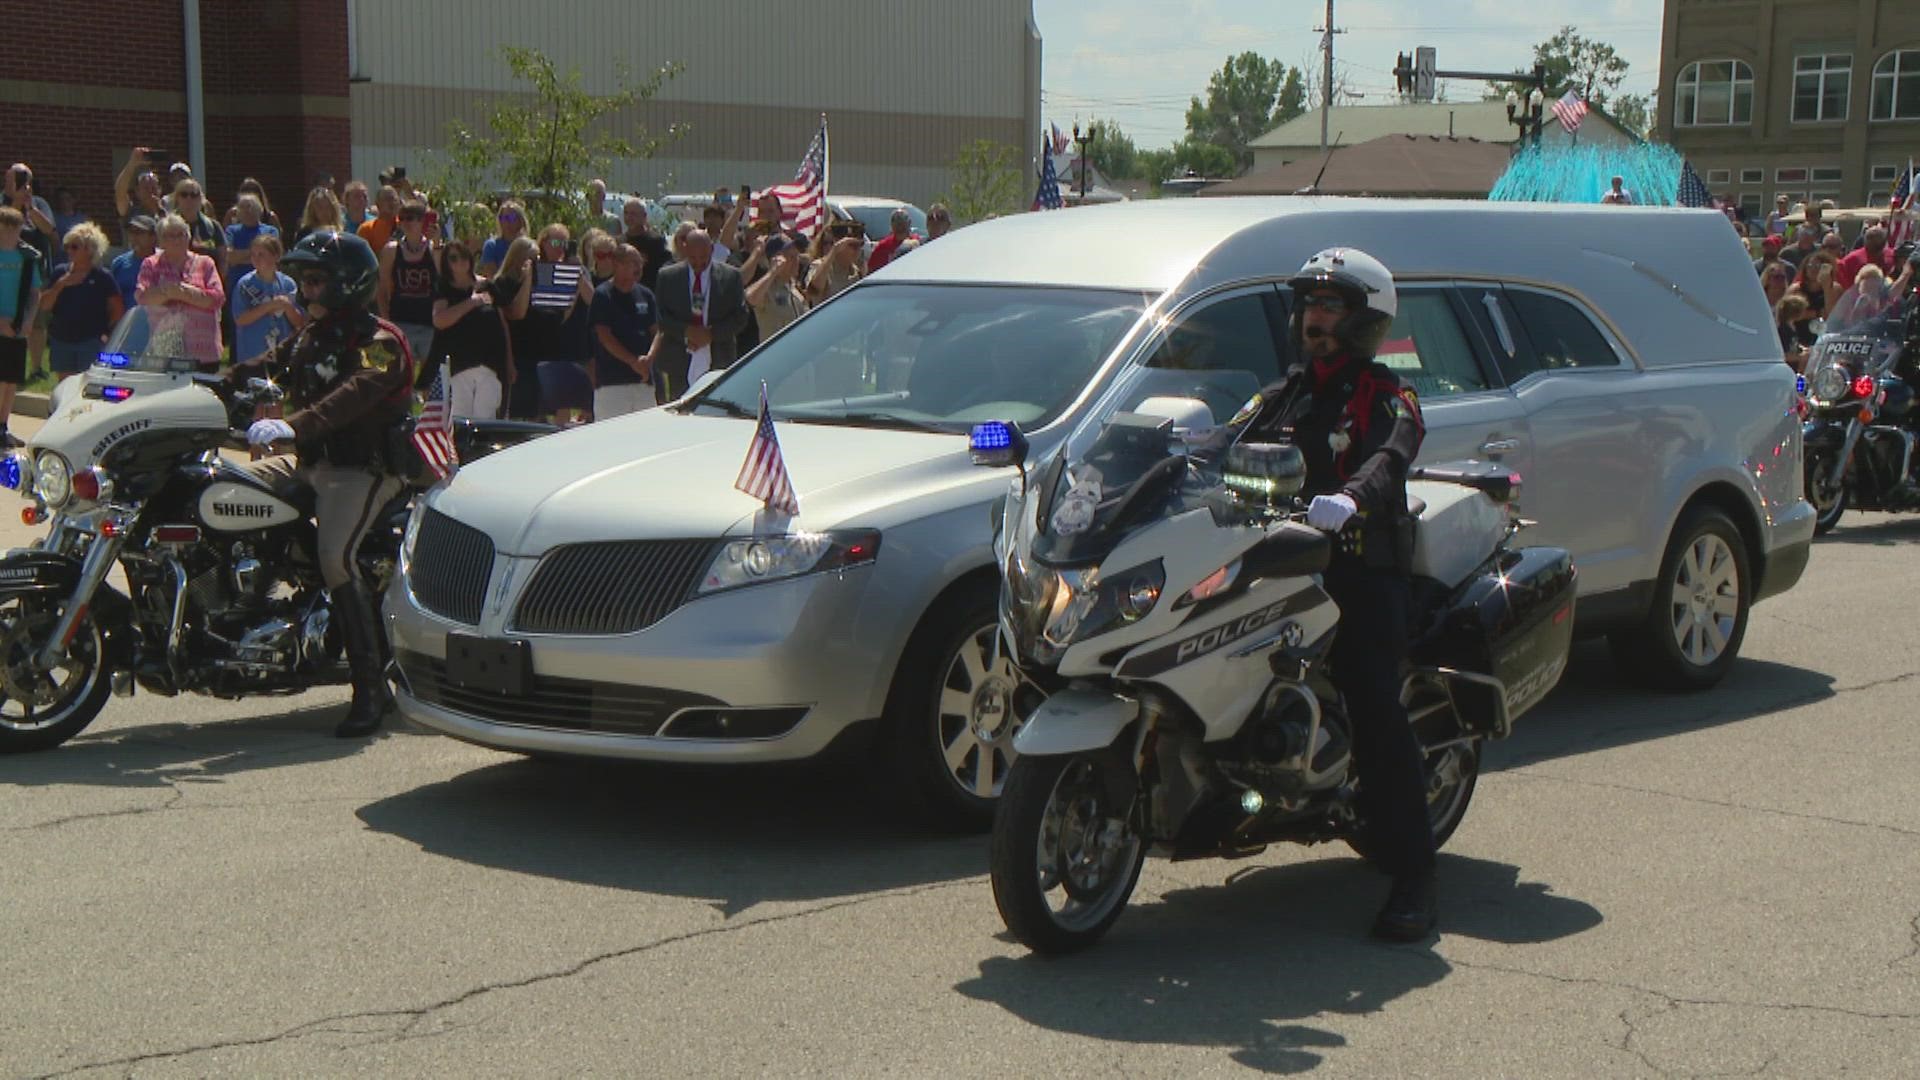 Fallen Officer Noah Shahnavaz was given his final 10-42 call of service outside the Elwood Police Department.